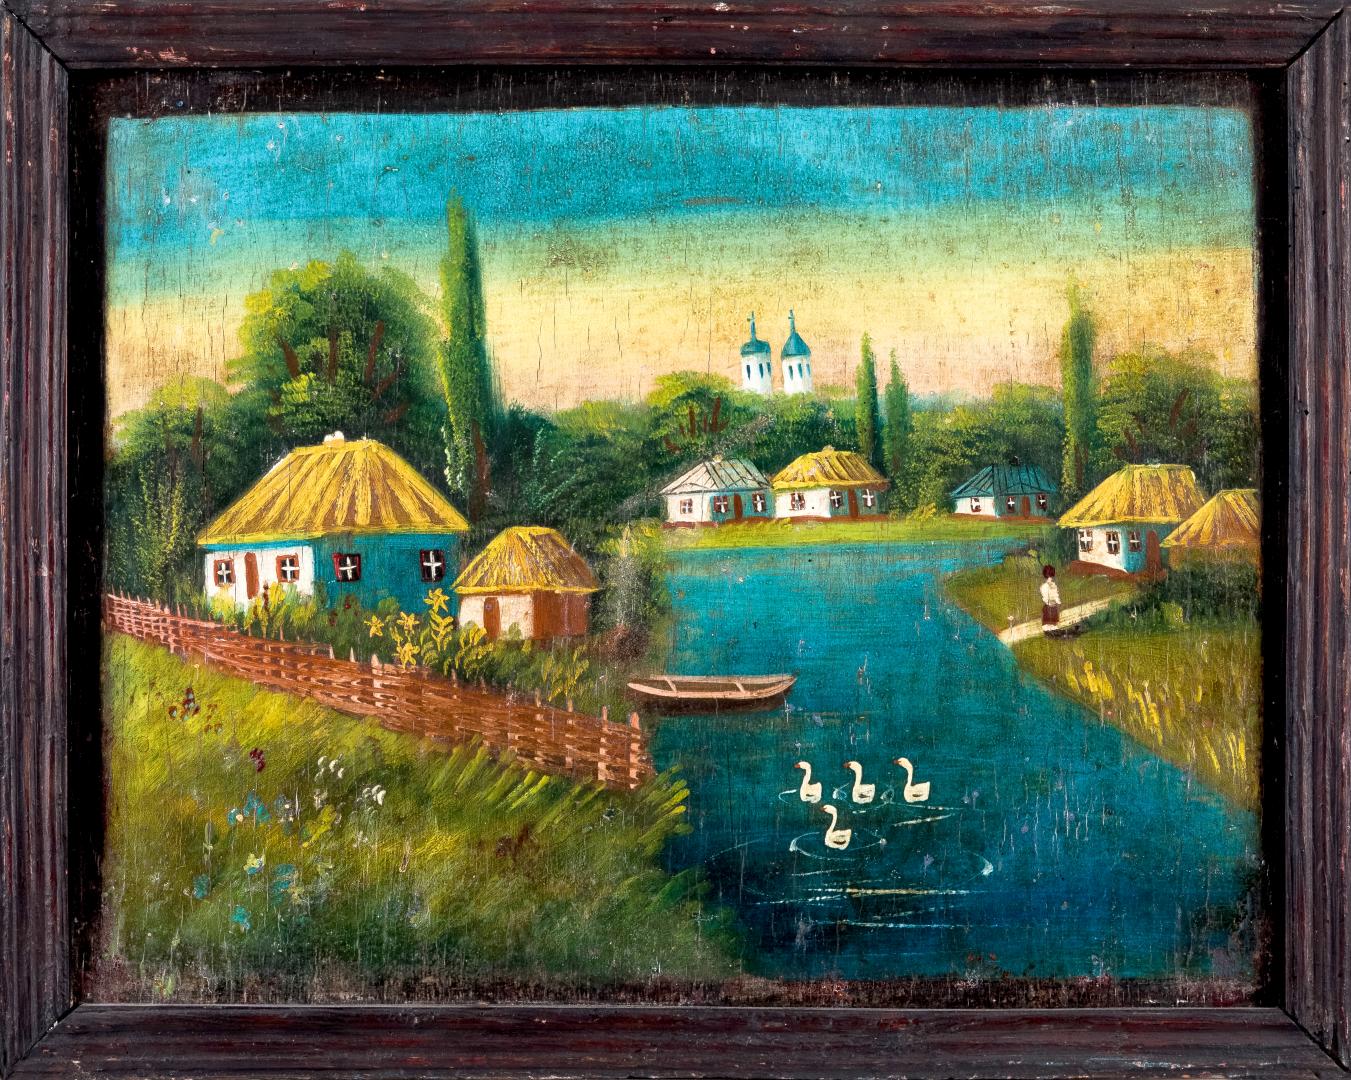 Rural landscape with a church and swans